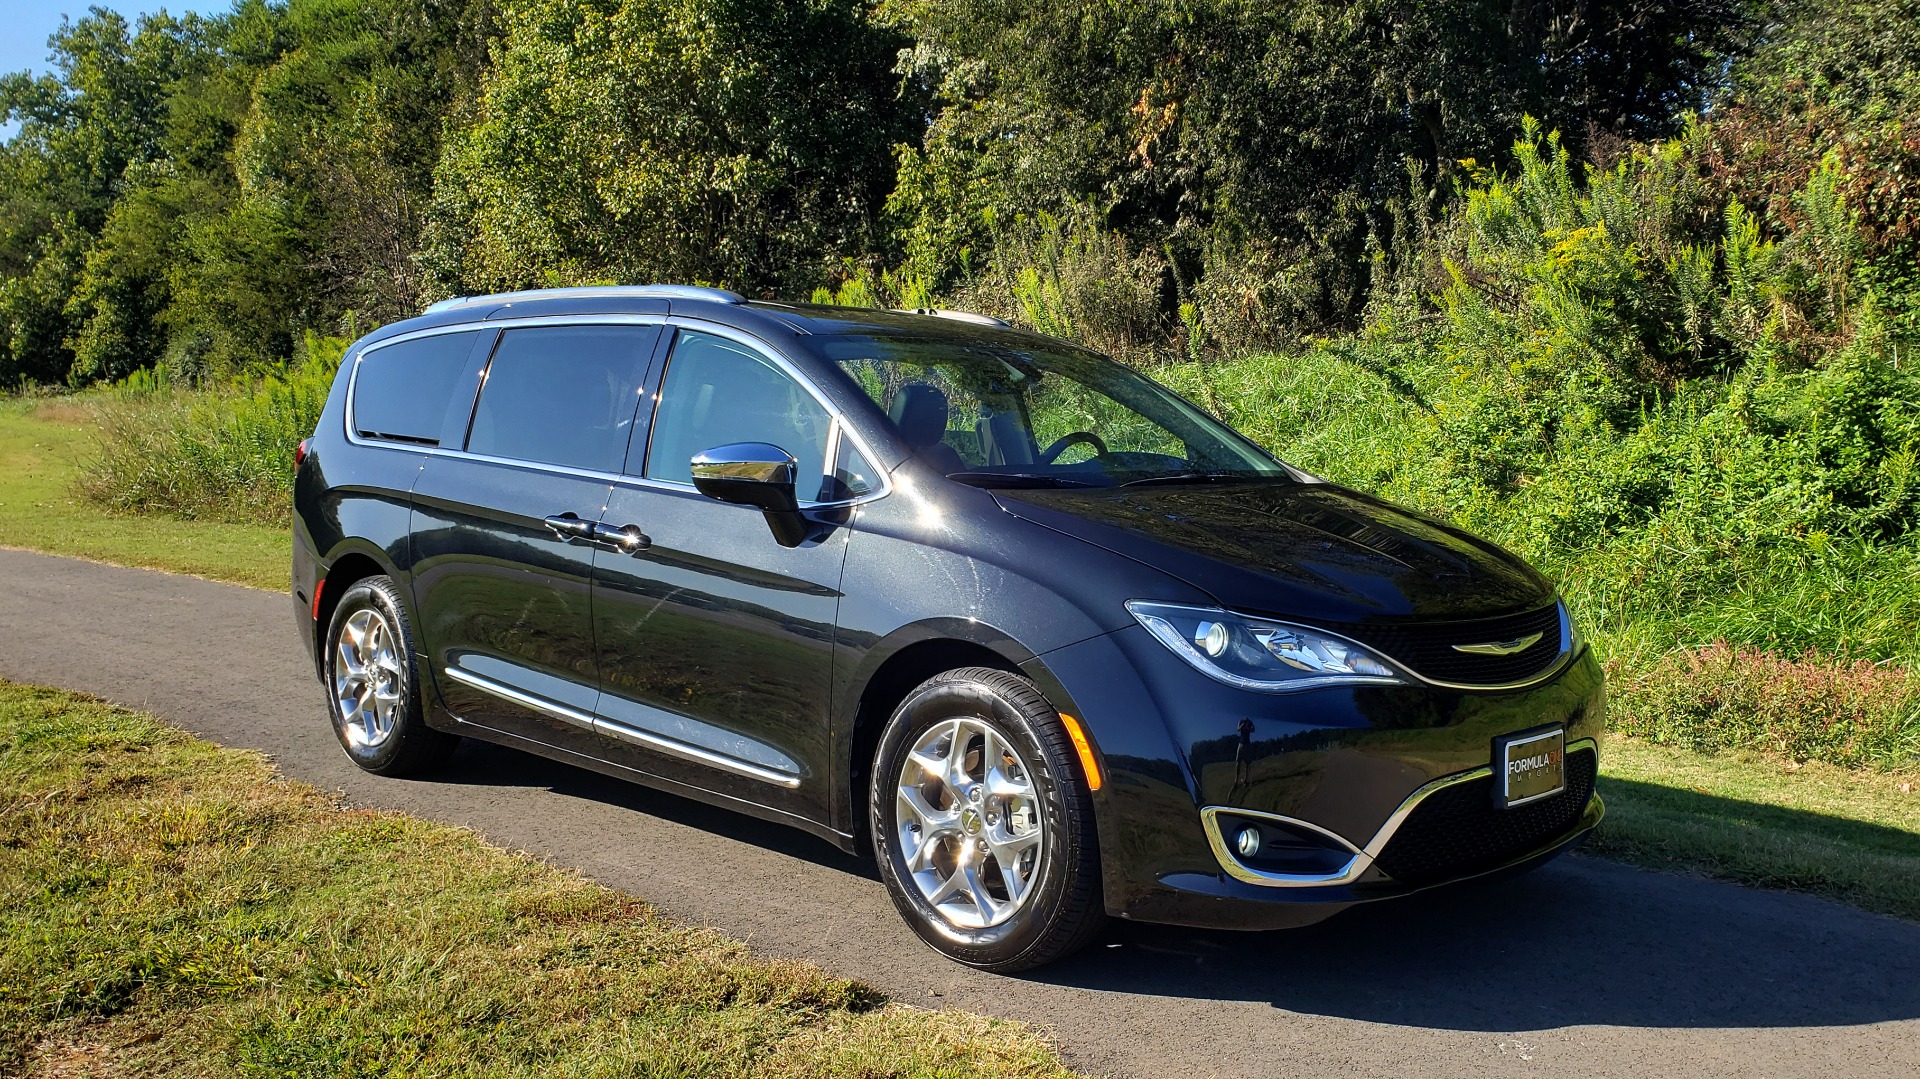 Used 2018 Chrysler PACIFICA LIMITED / 3.6L V6 / NAV / PANO-ROOF / 3-ROWS / REARVIEW for sale Sold at Formula Imports in Charlotte NC 28227 2